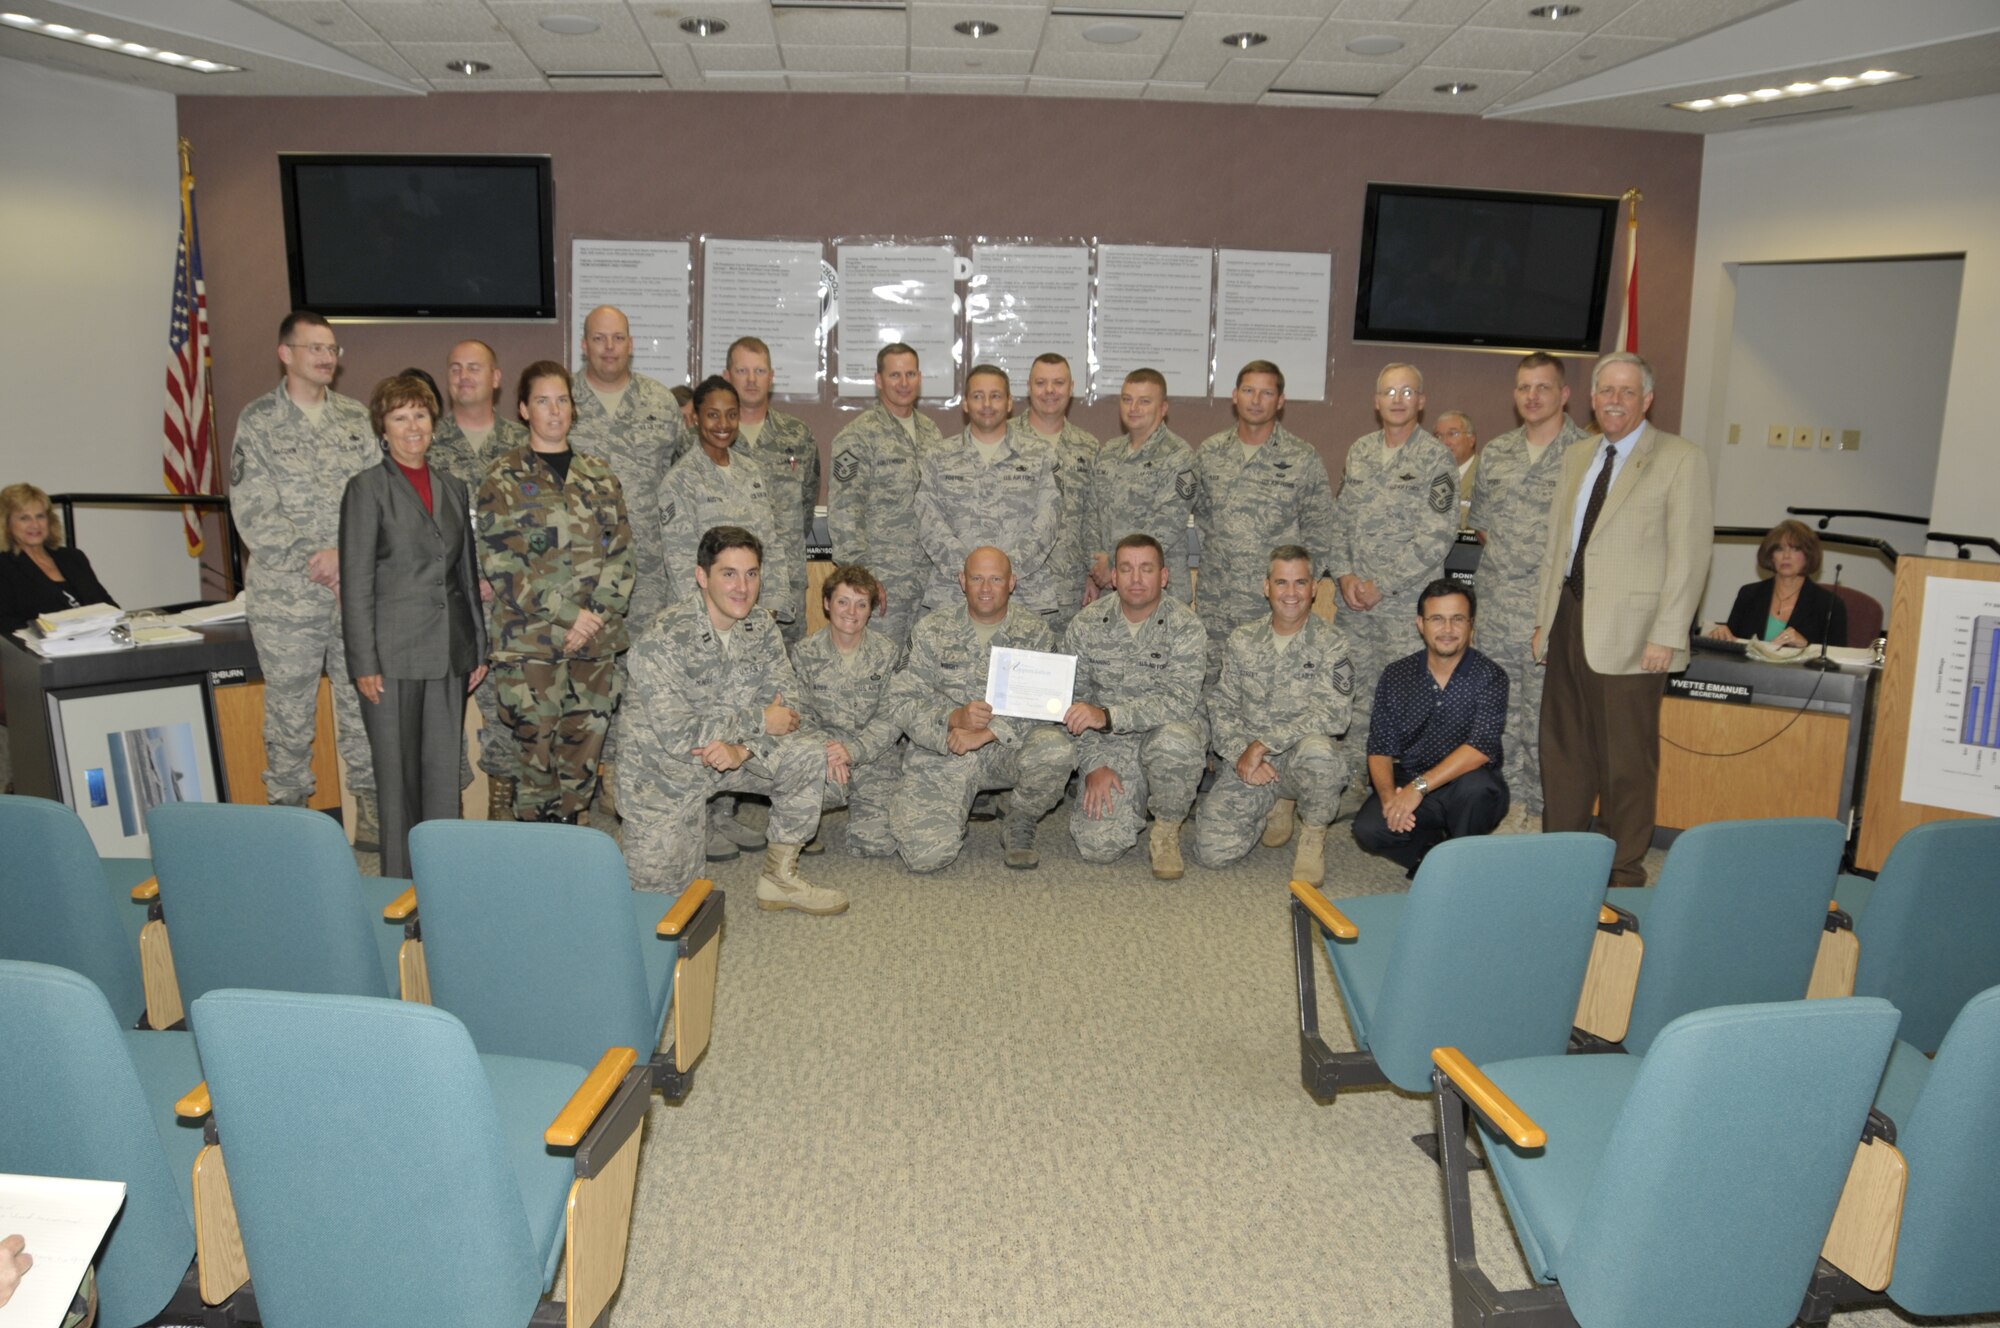 Volunteers and leadership from Tyndall Air Force Base attend a Bay County District School Board meeting to receive recognition for the efforts Team Tyndall put forth in cleaning two local schools Sept. 9.  (U.S. Air Force photo/Lisa Norman)